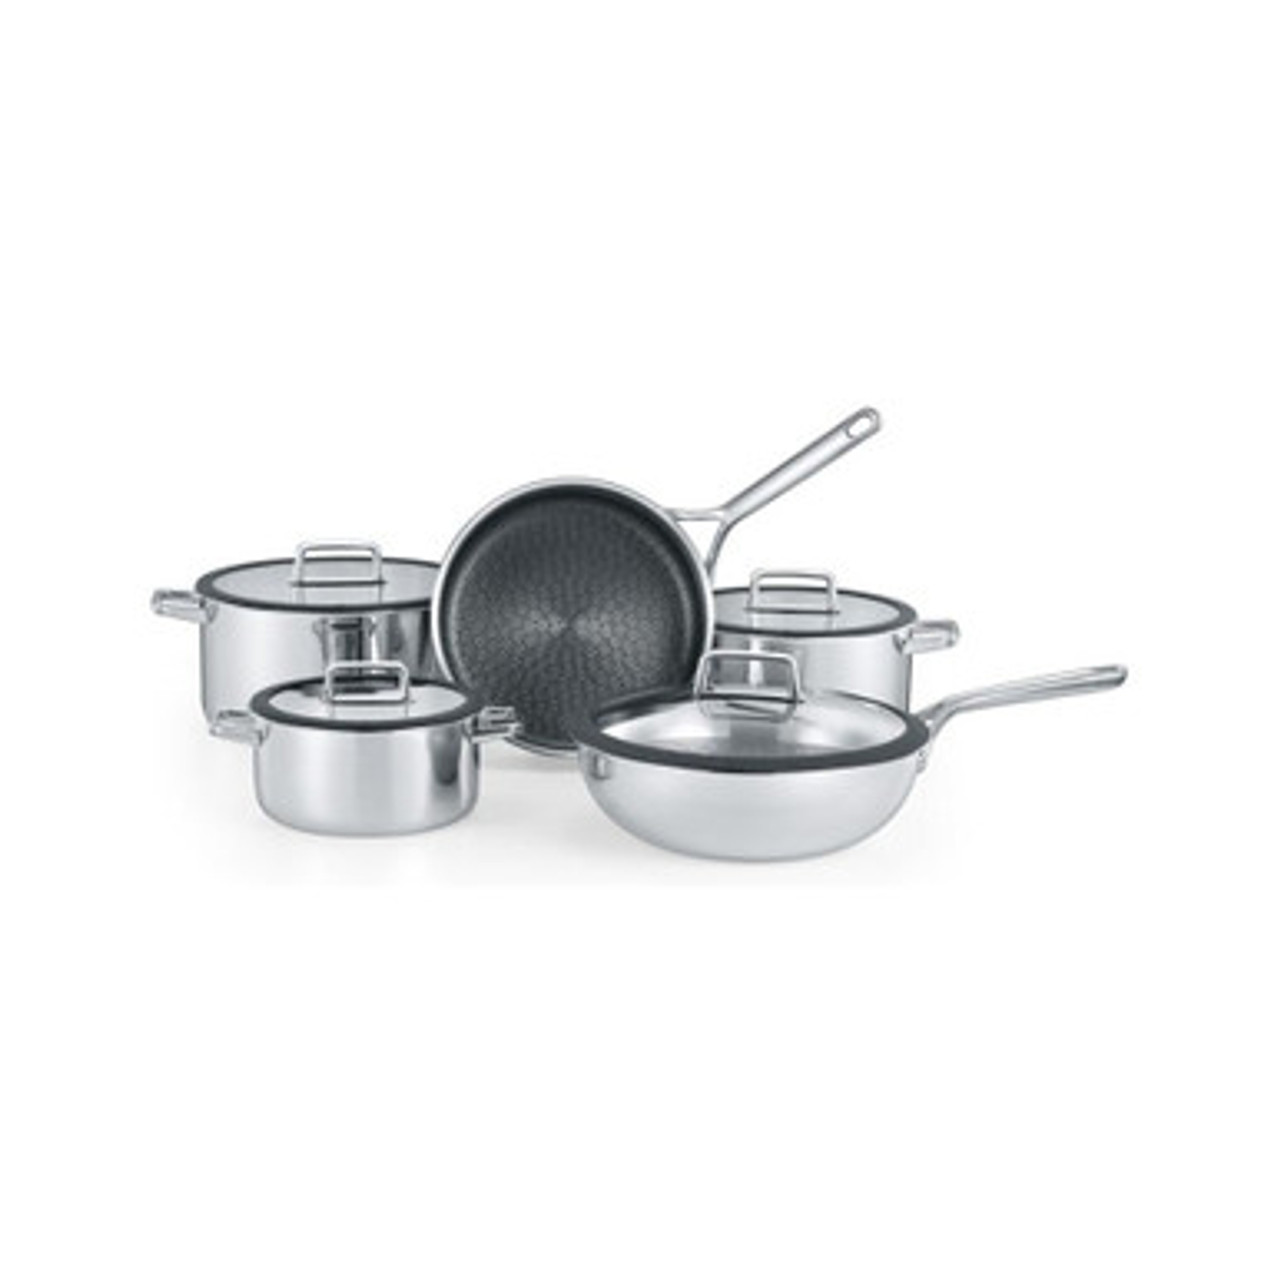 Arshia Stainless Steel Cookware set 10pcs Heavy Duty Nonstick